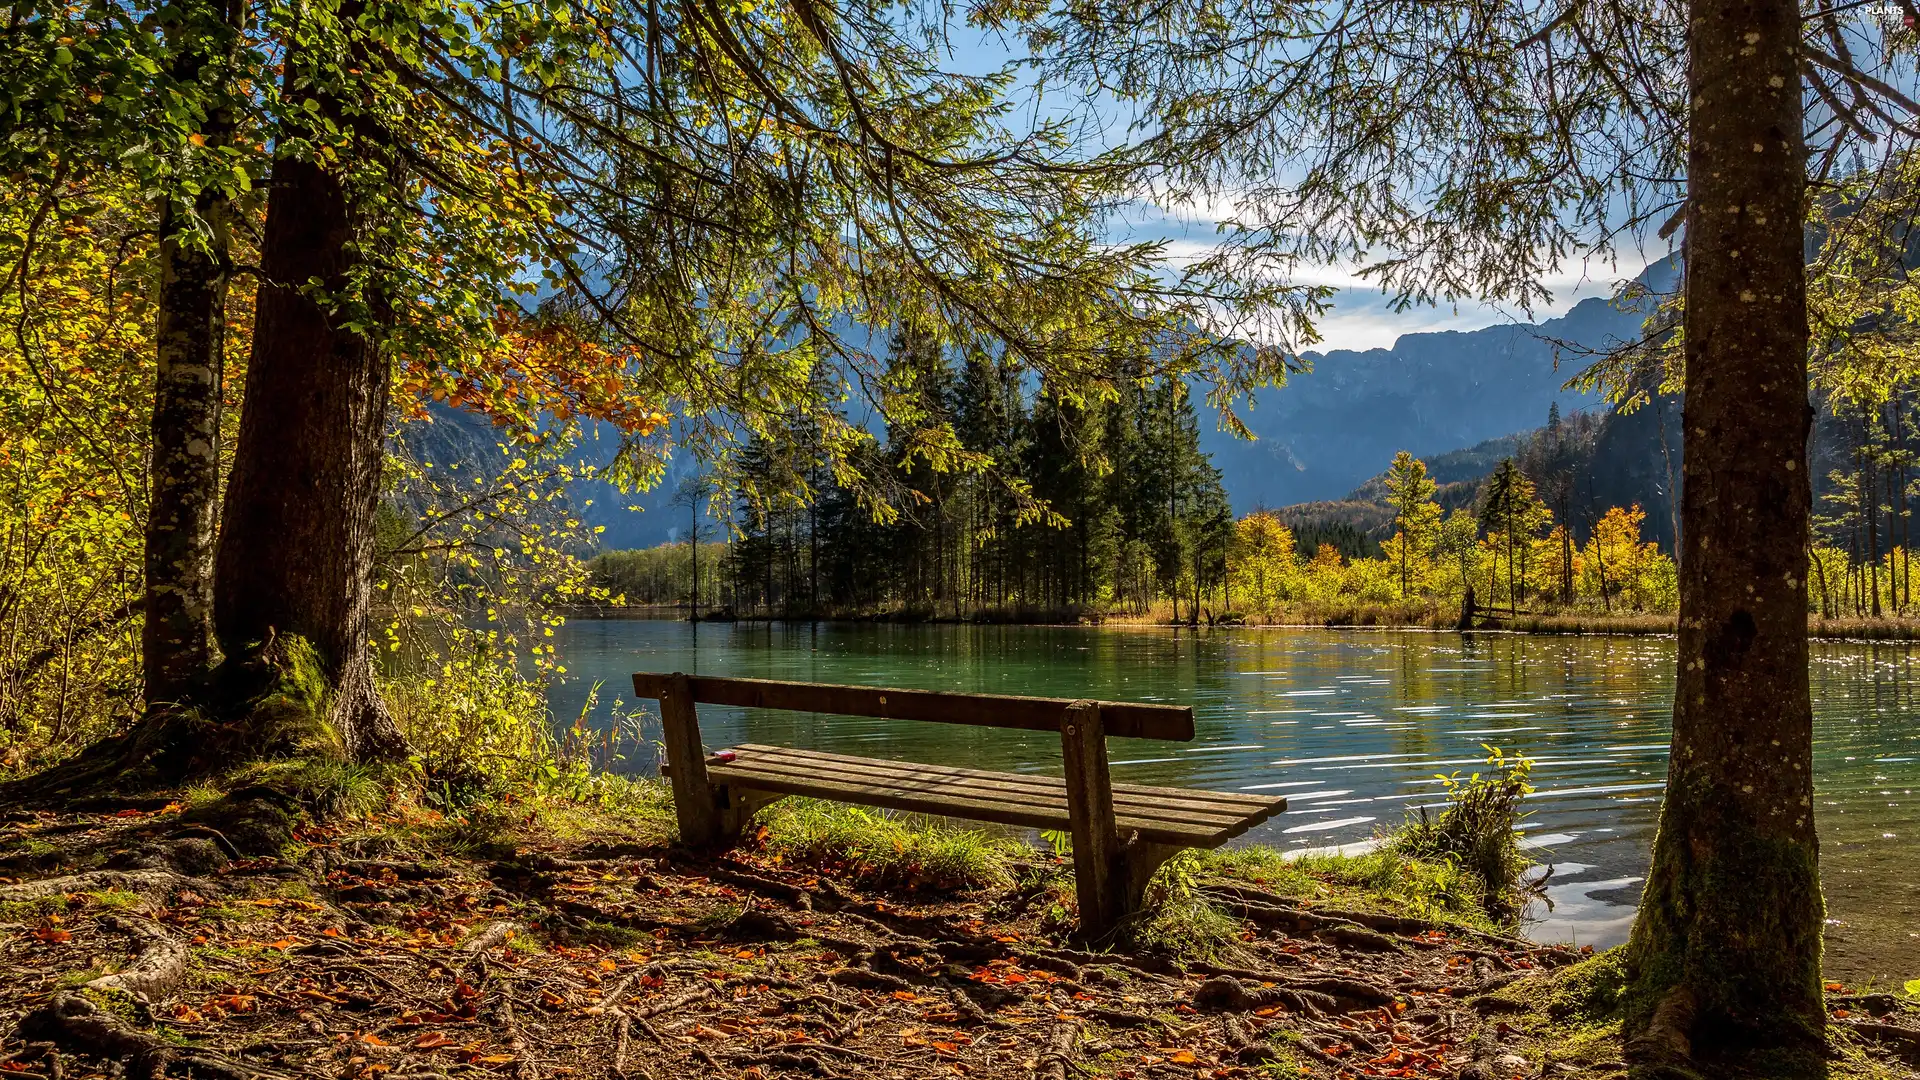 viewes, Mountains, Bench, trees, River